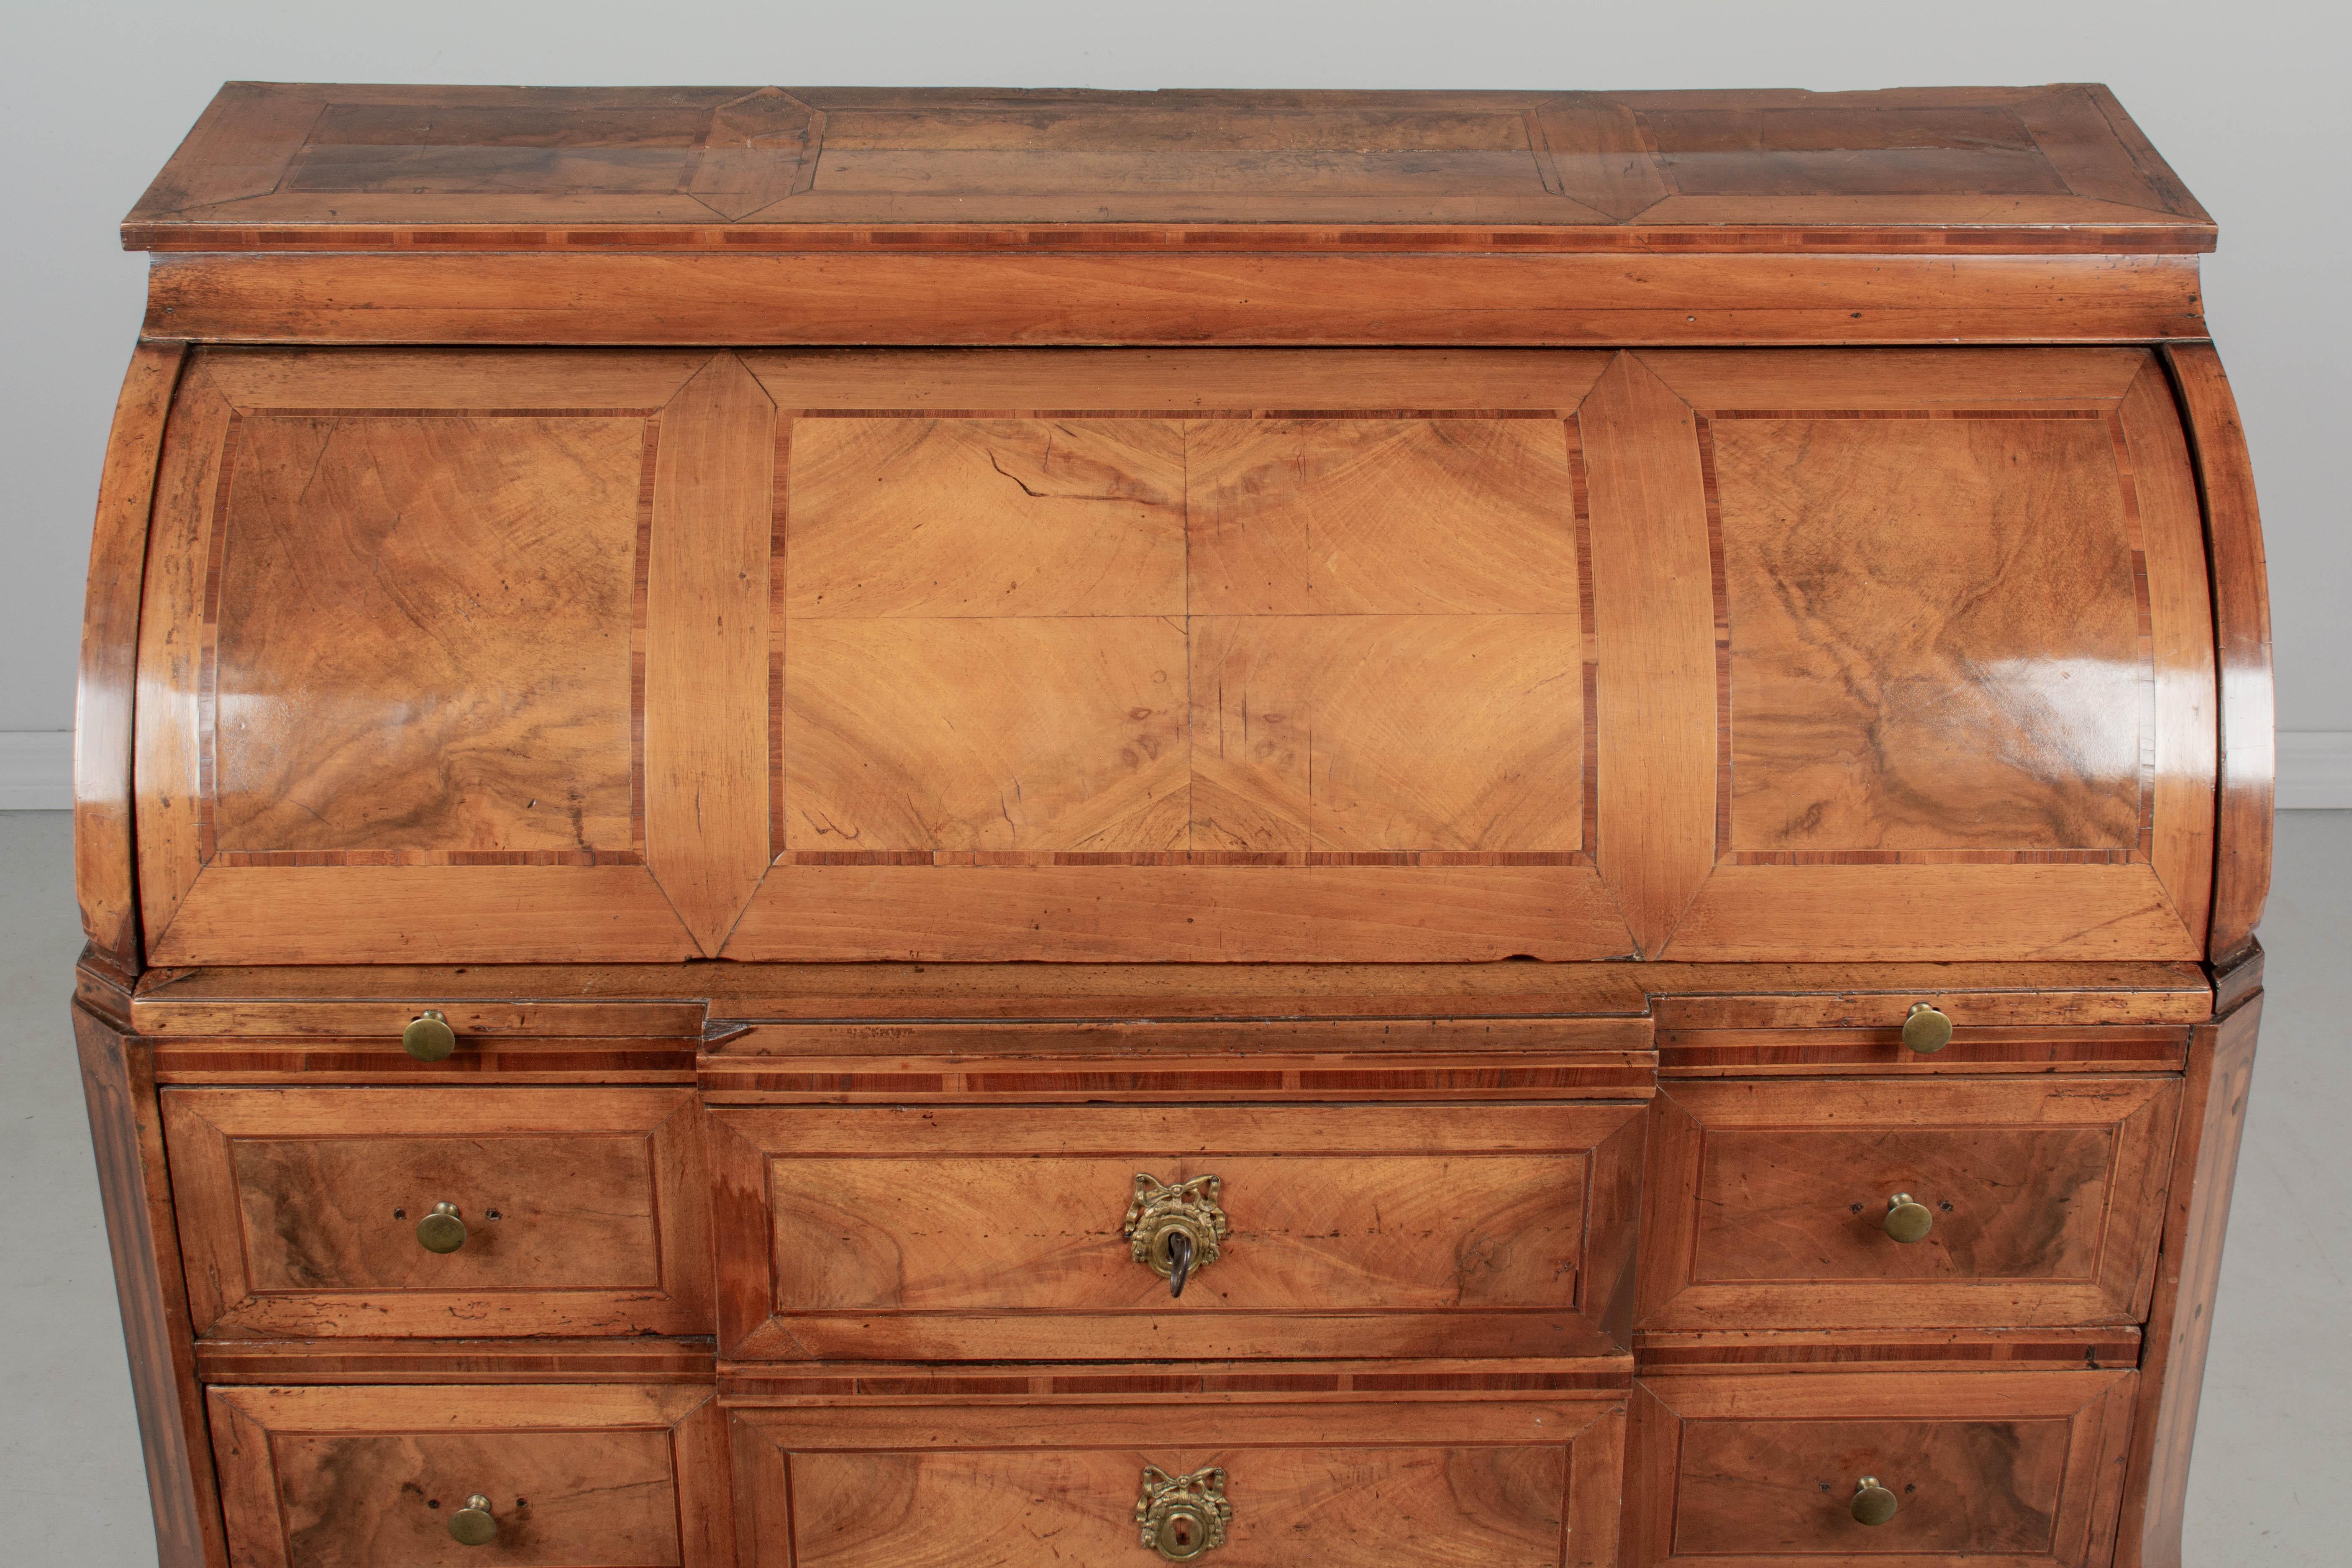 A fine early 19th century Louis XVI period bureau à cylindre, or roll top desk, made of solid walnut with marquetry veneers of walnut, mahogany and cherry. Pine as a secondary wood. The surface of the cylinder has book matched walnut veneer and